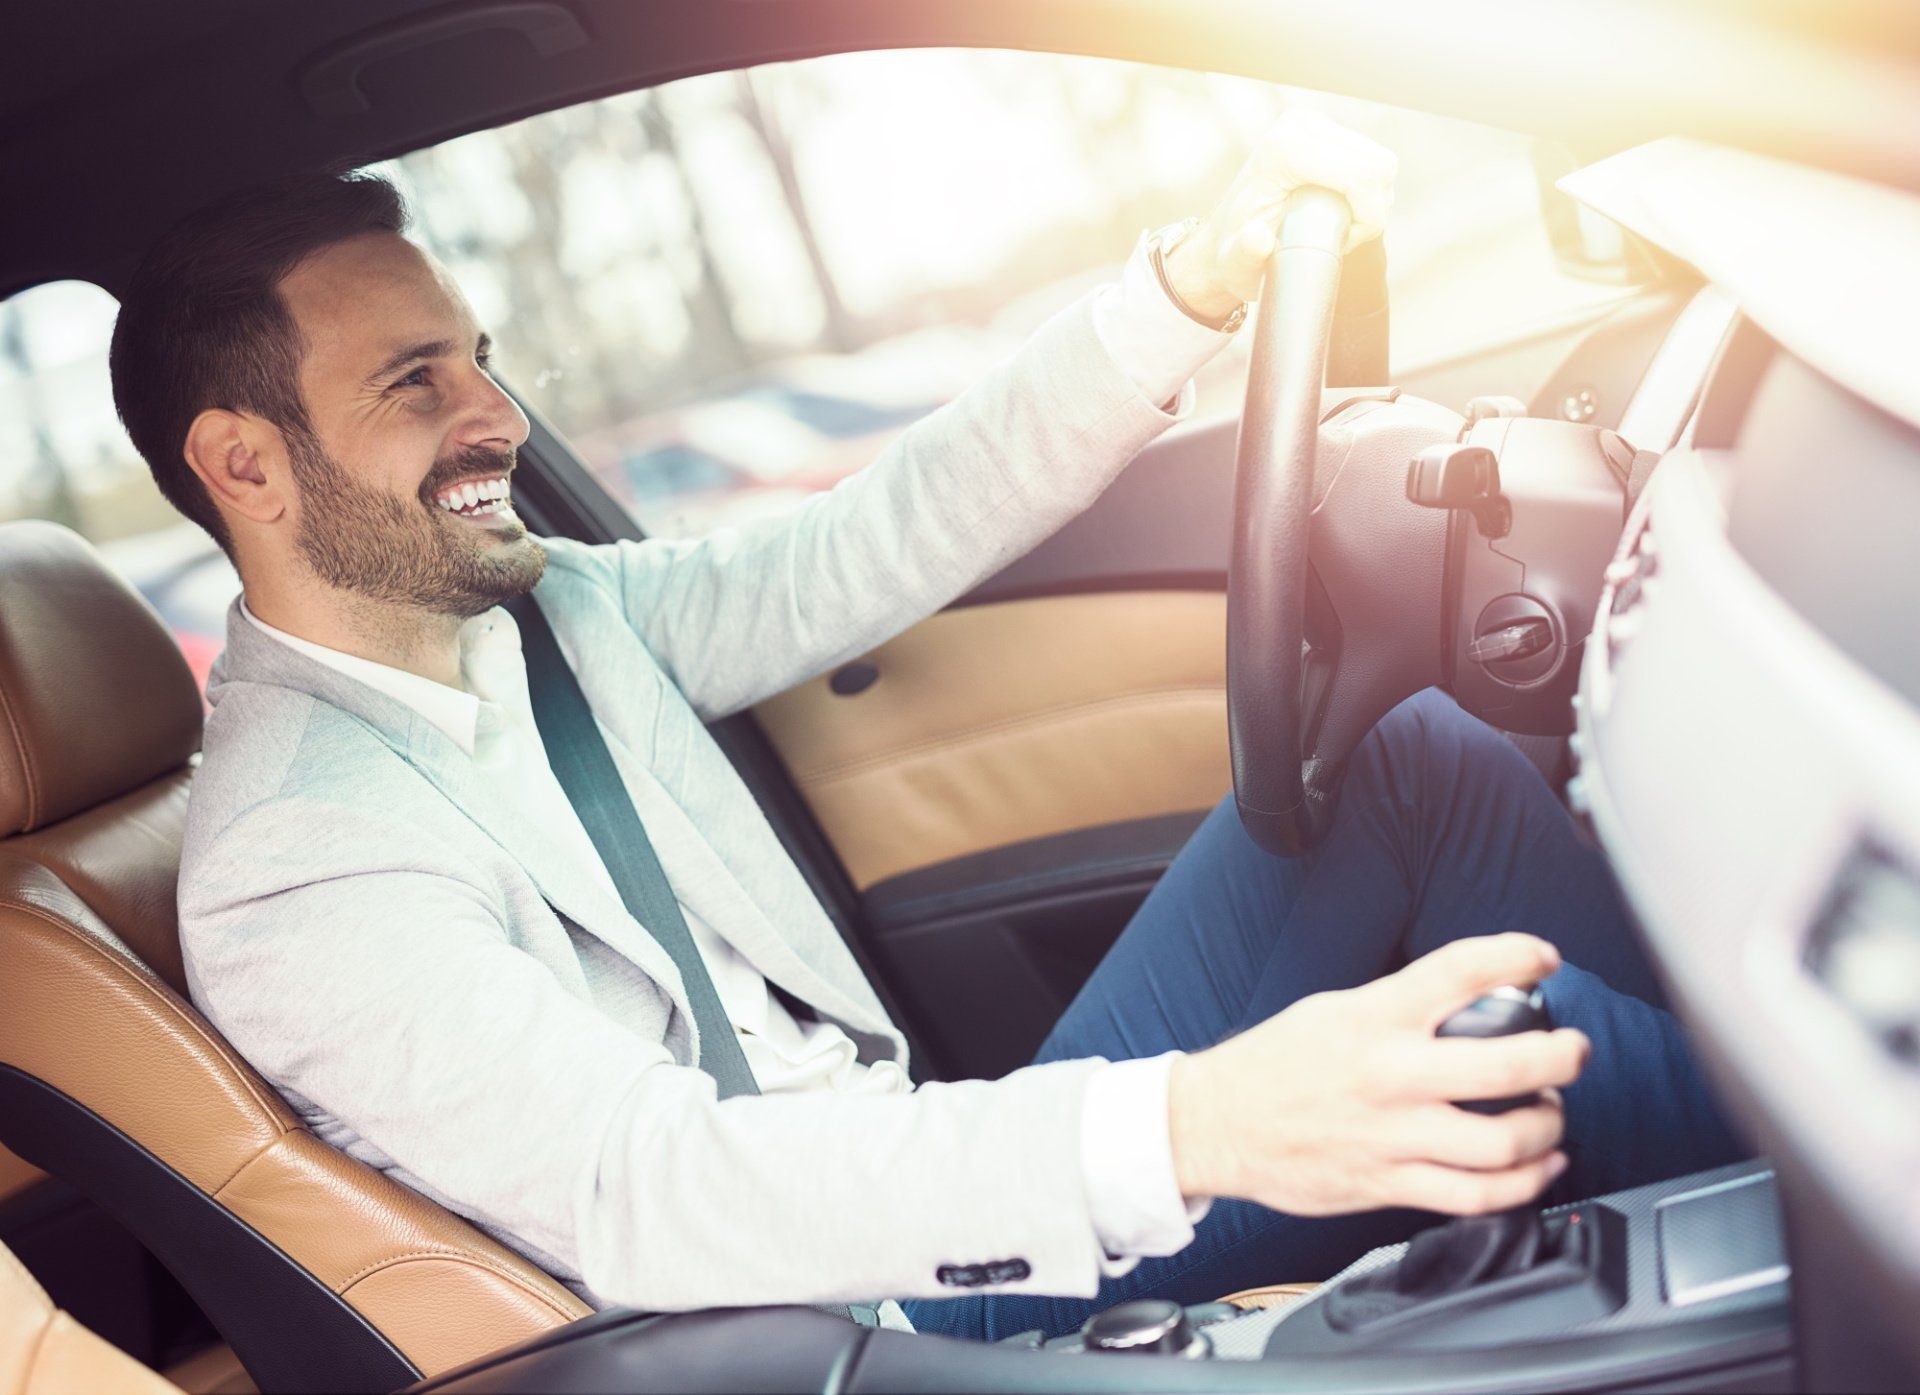 A man in a suit is driving a car and smiling.